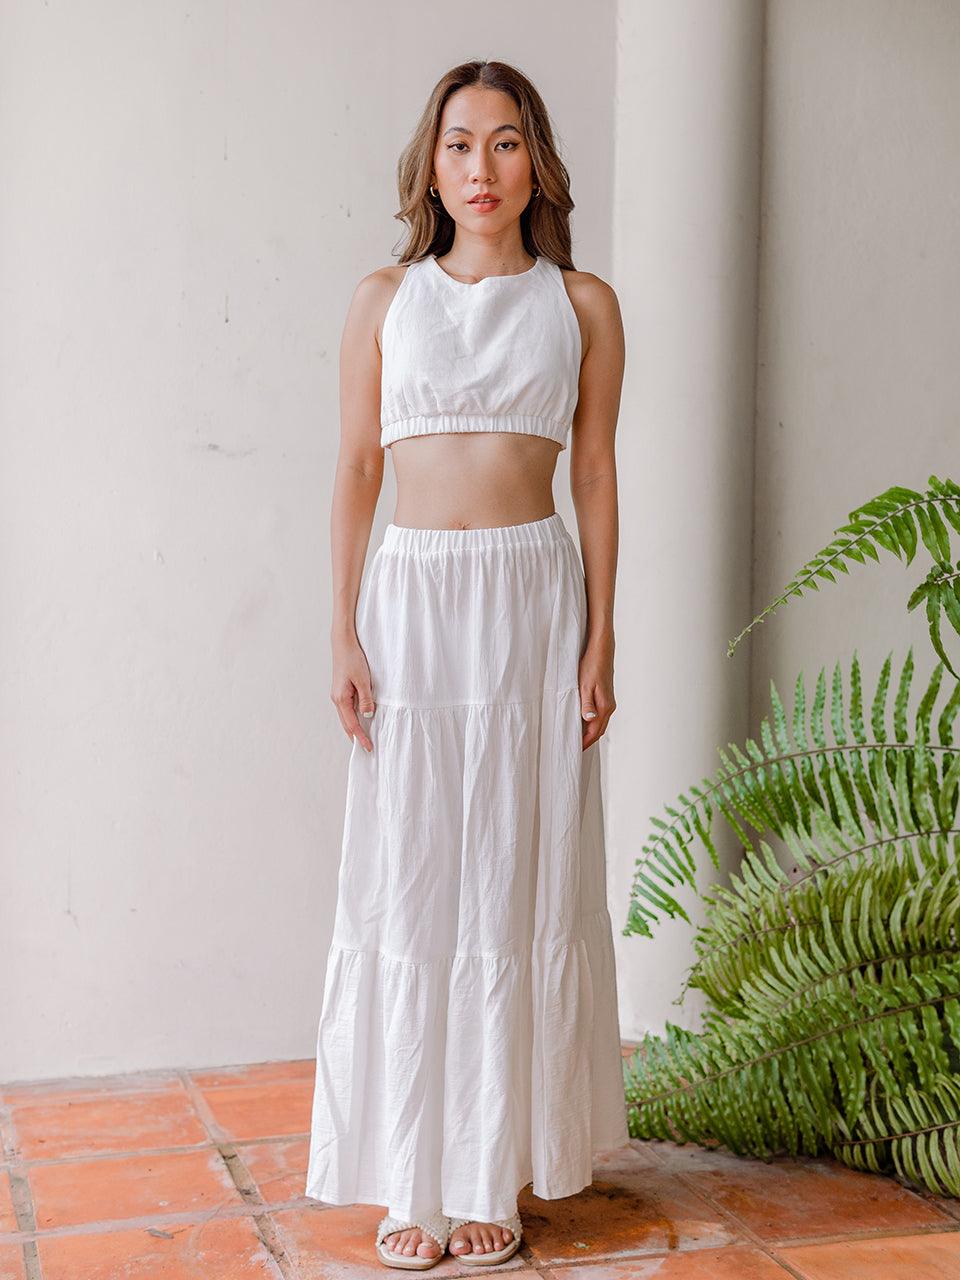 Nyra Tank Top and Long Skirt Co Ord 2 Piece Set in White - Pink N' Proper